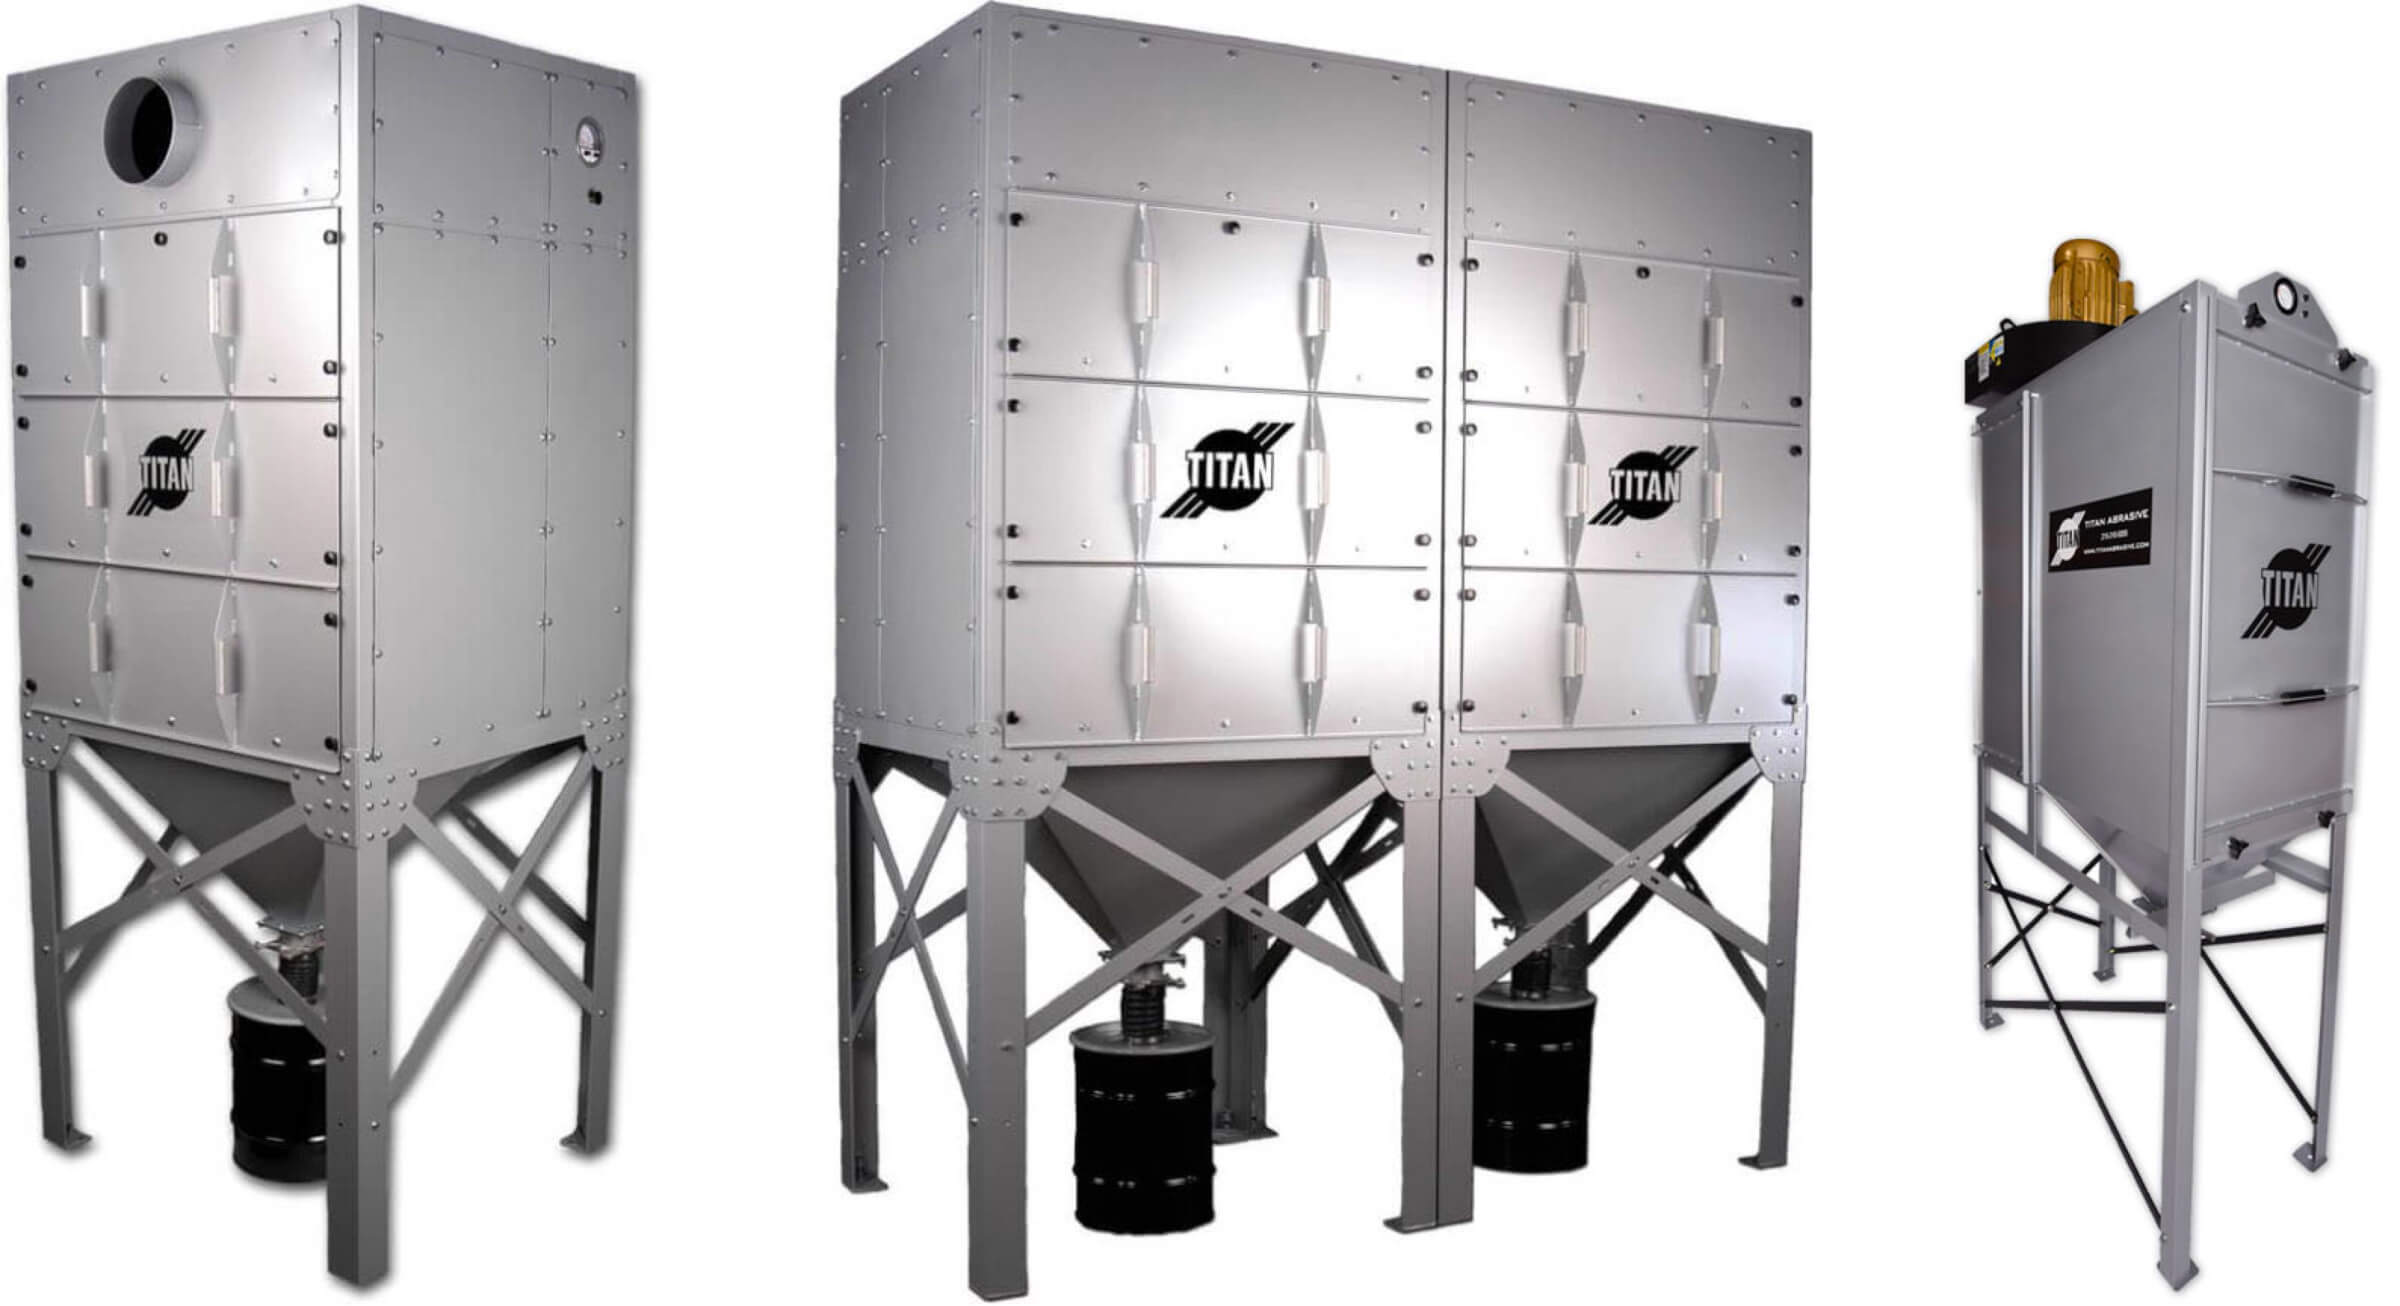 Titan Abrasive cartridge dust collectors for blast rooms and blast cabinets